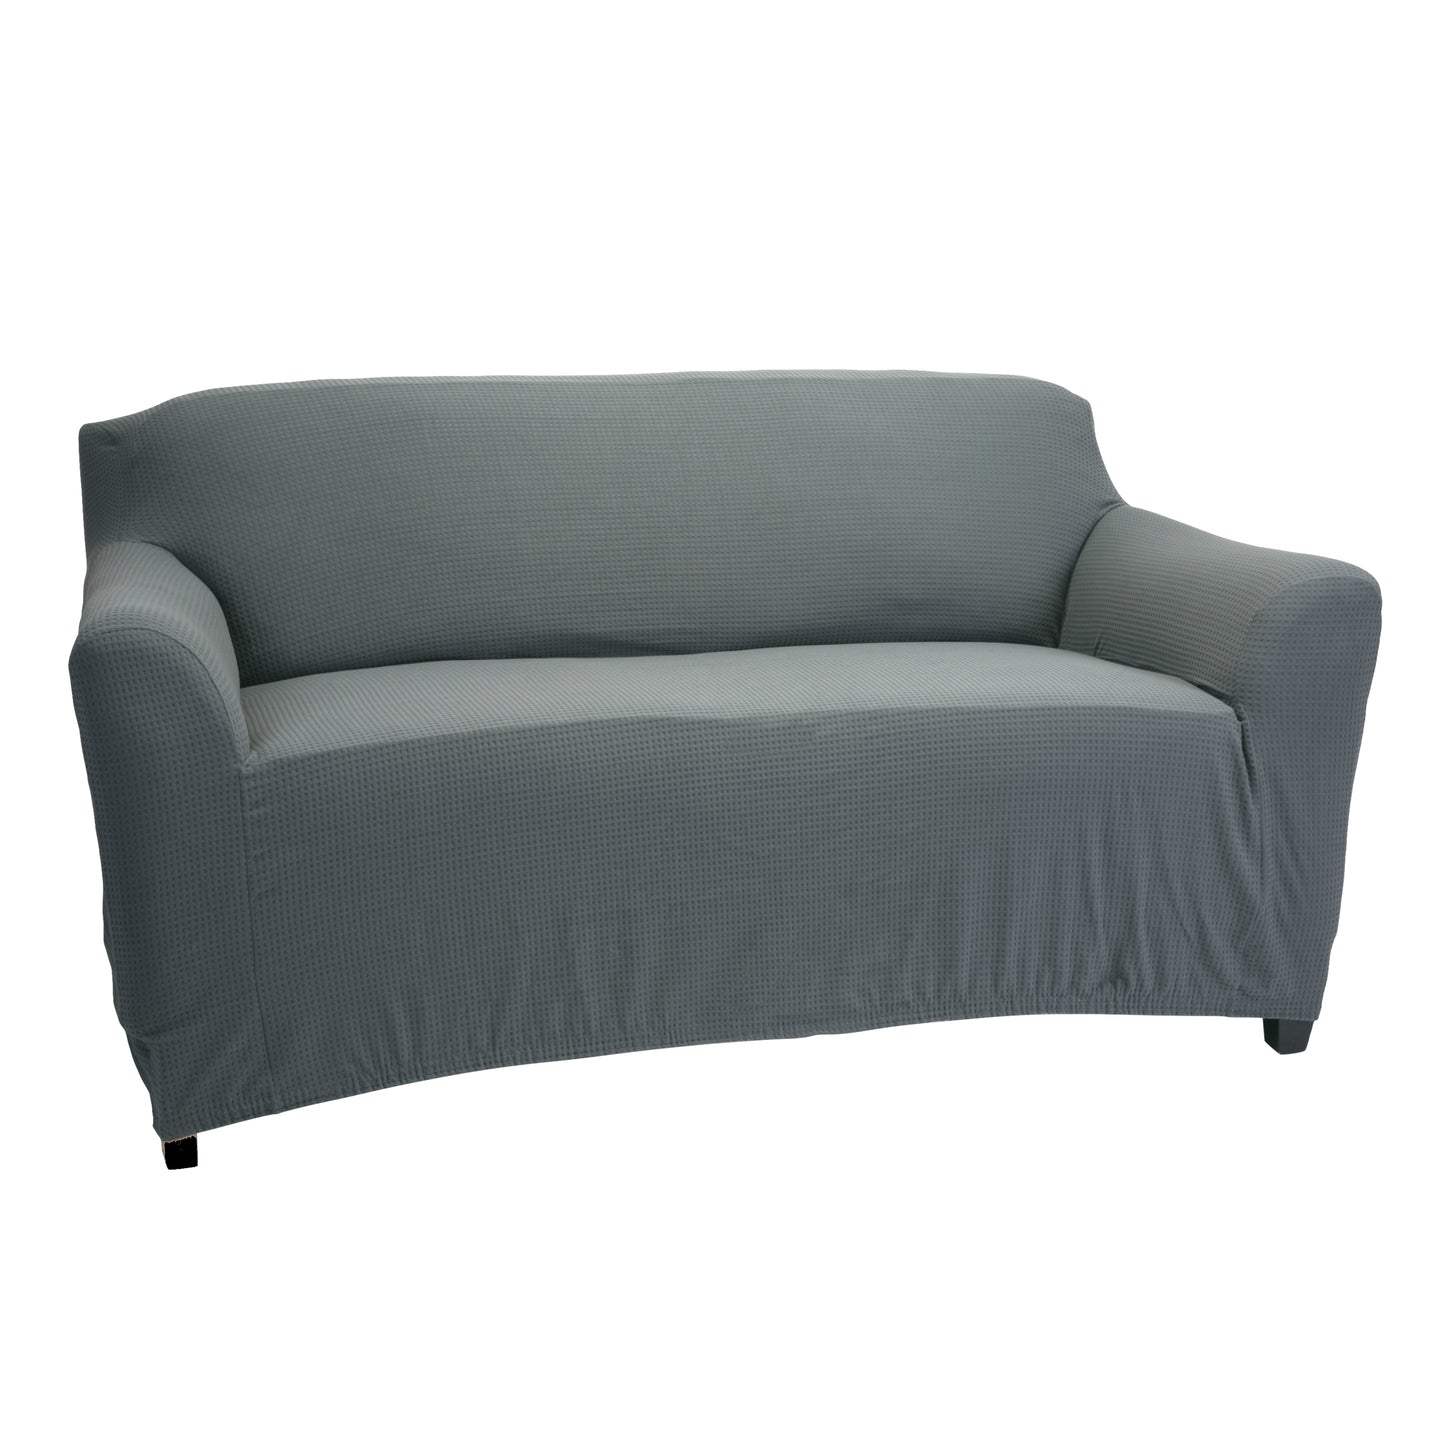 Home Details Waffle Design Love Seat Furniture Slipcover in Grey